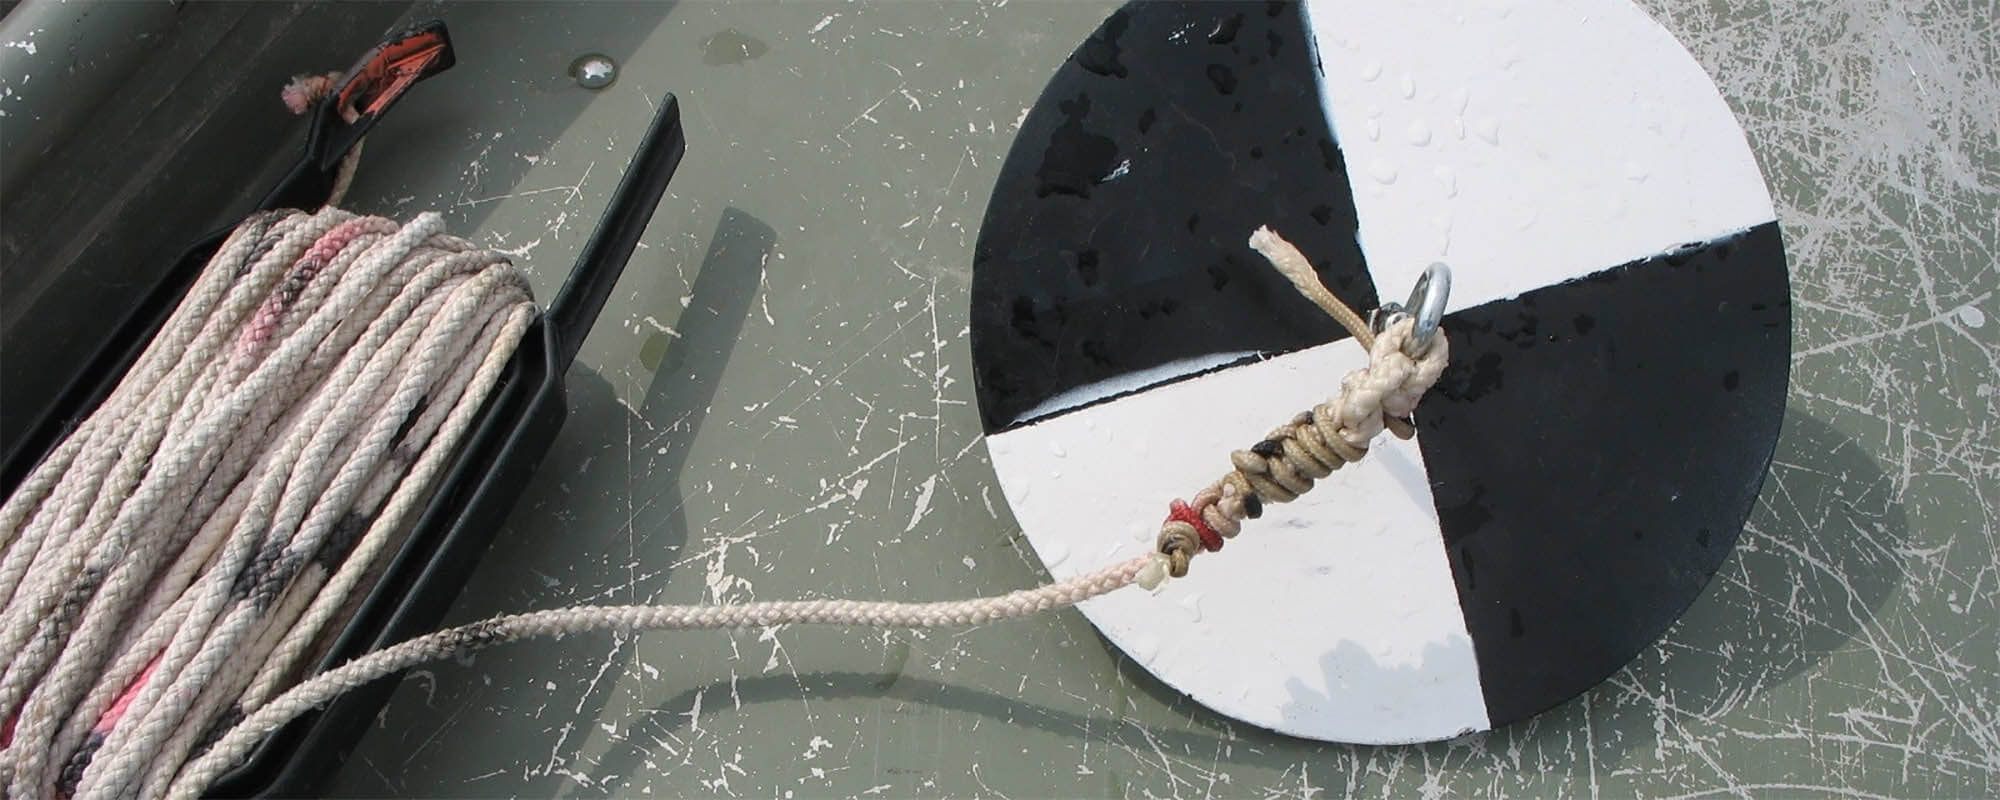 A Secchi Disk is Used to Measure Water Clarity